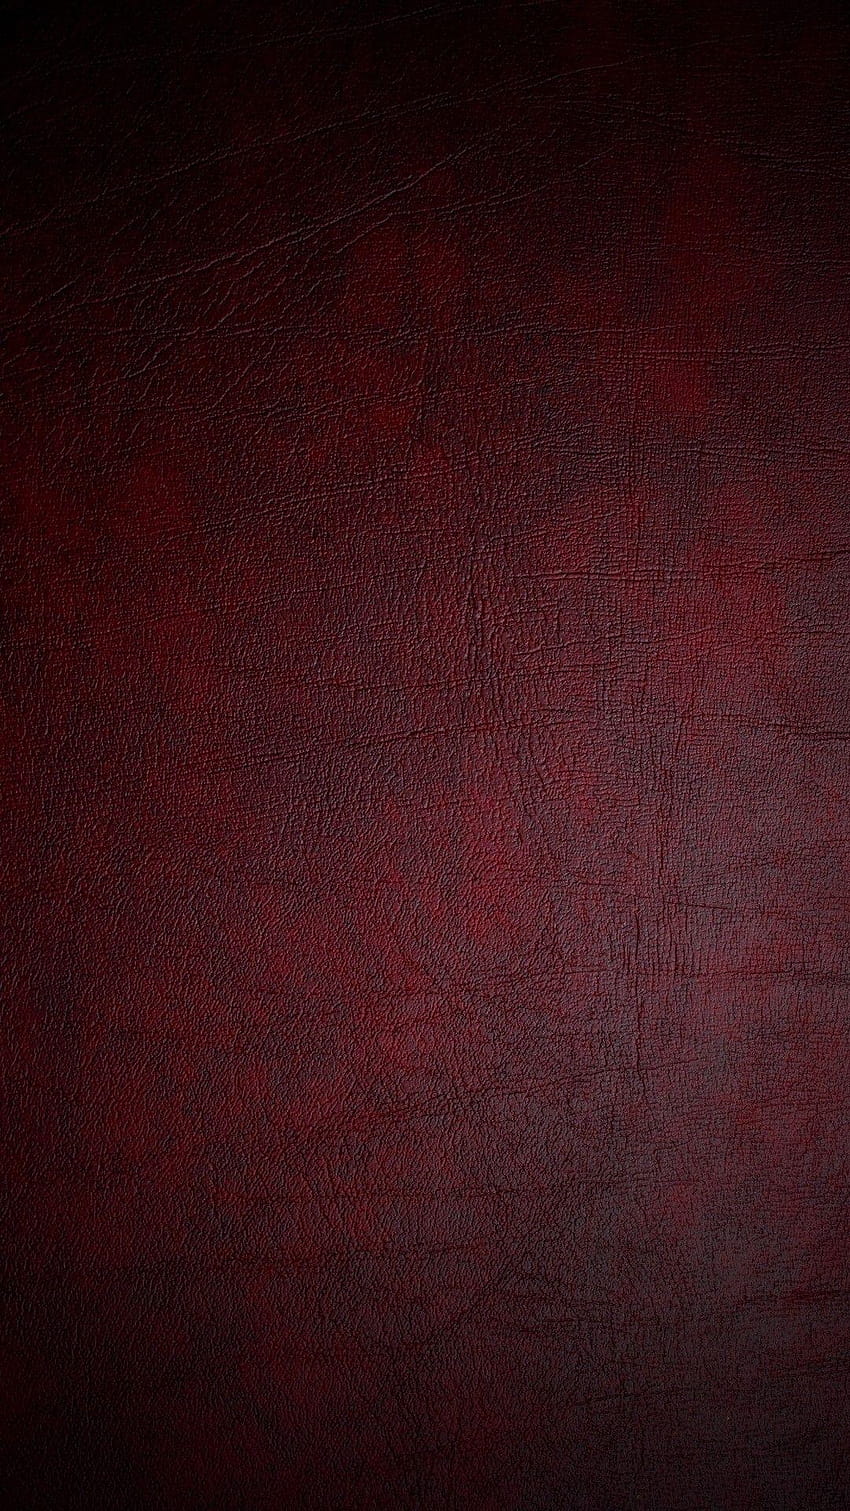 Leather Red, black leather samsung HD phone wallpaper